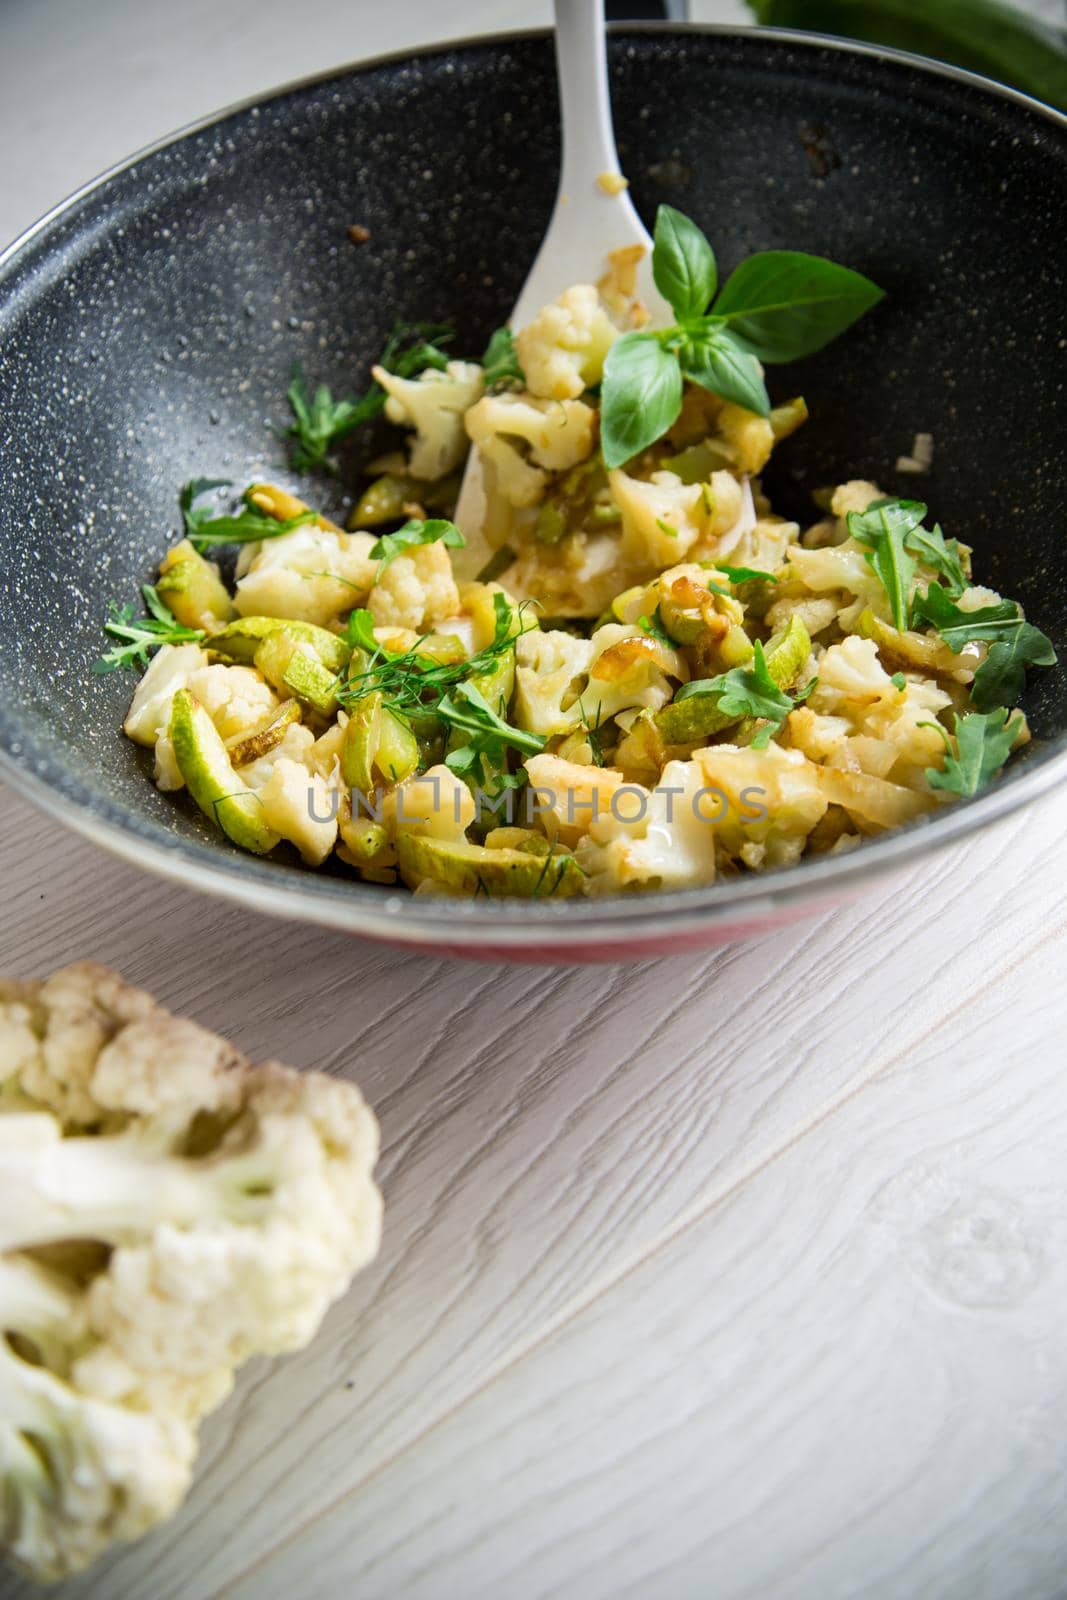 cauliflower fried with zucchini and vegetables in a pan with herbs